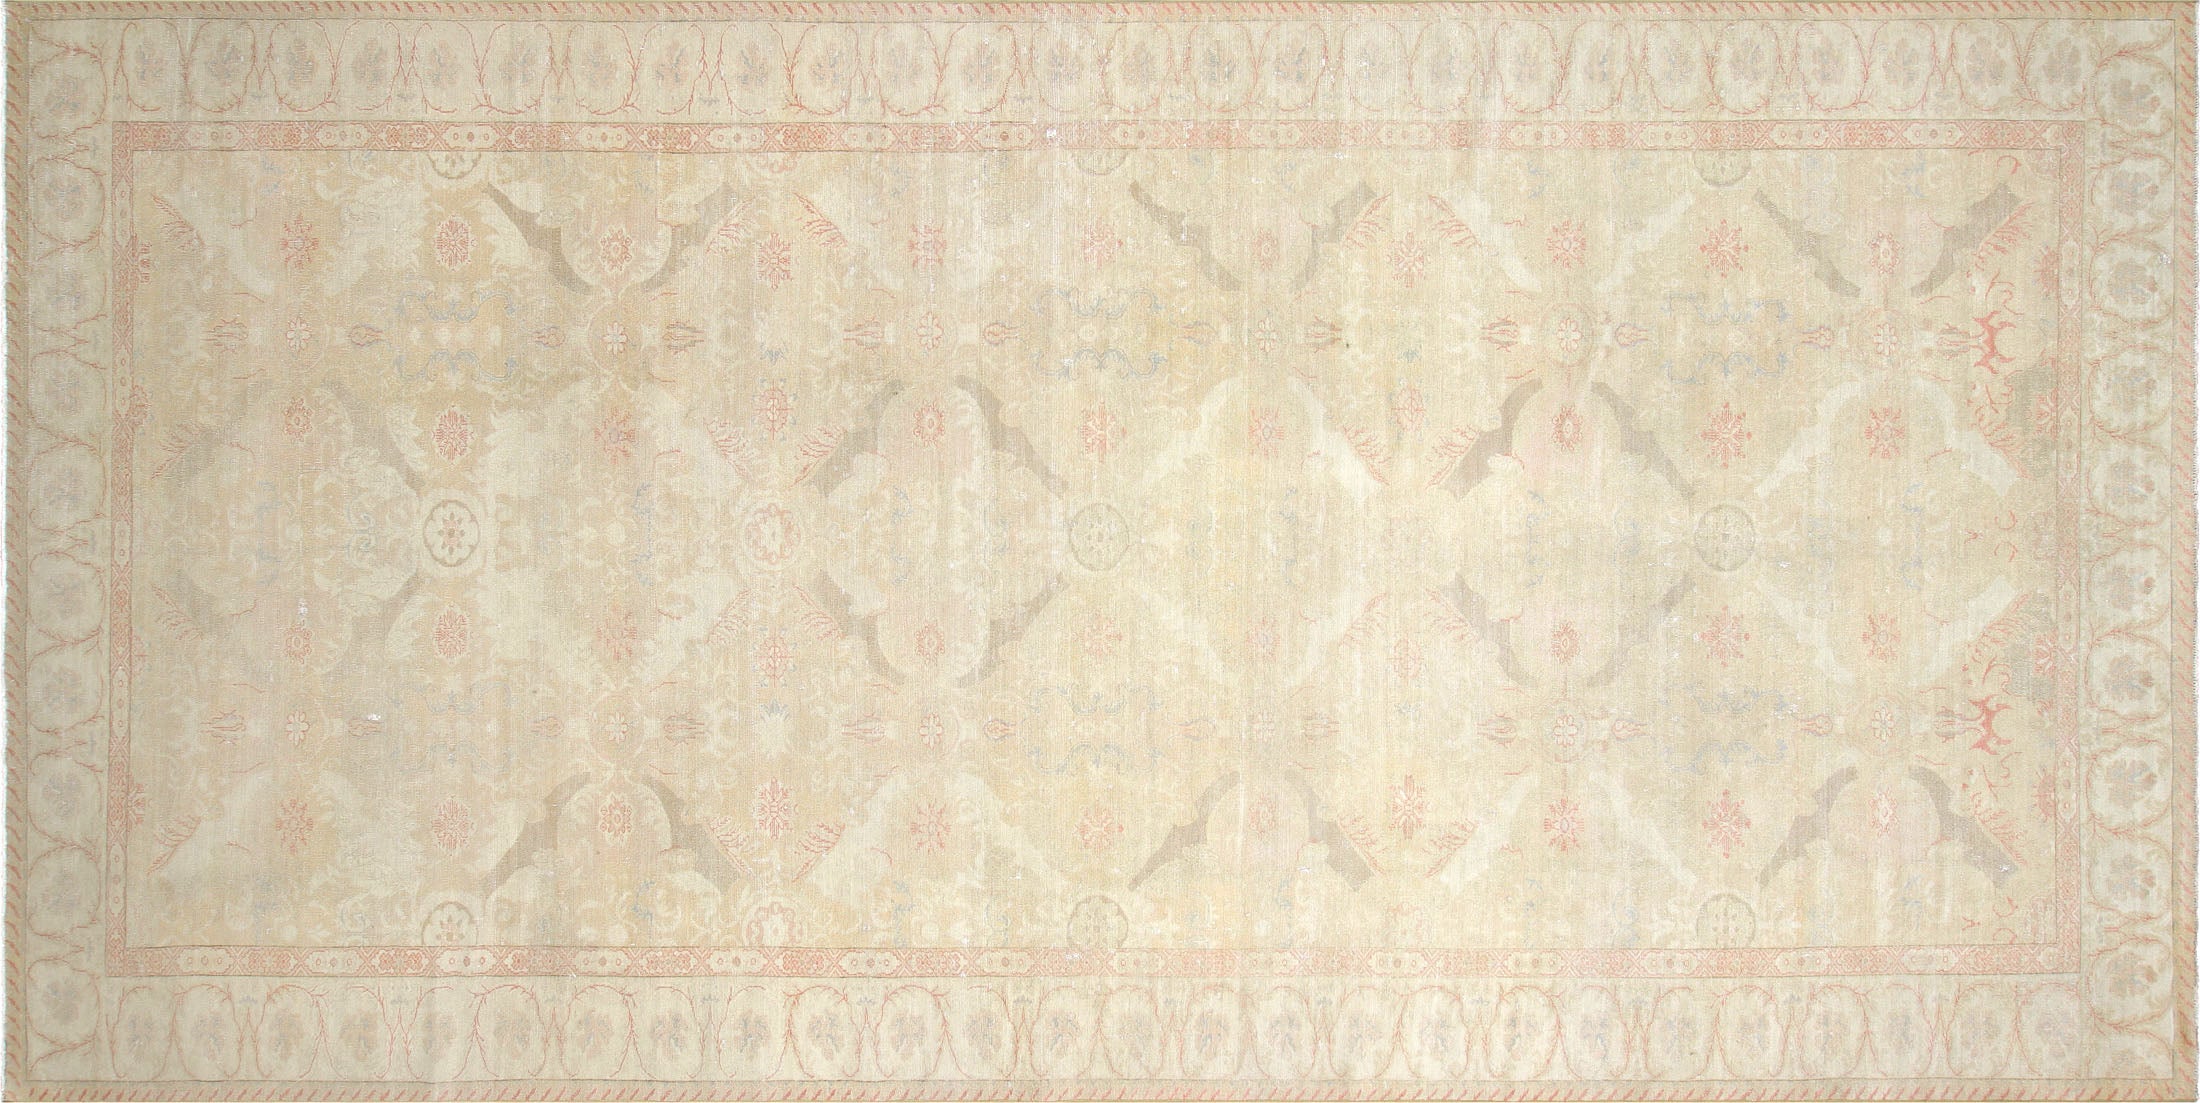 Recently Woven Egyptian Sultanabad Carpet - 9'6" x 19'4"